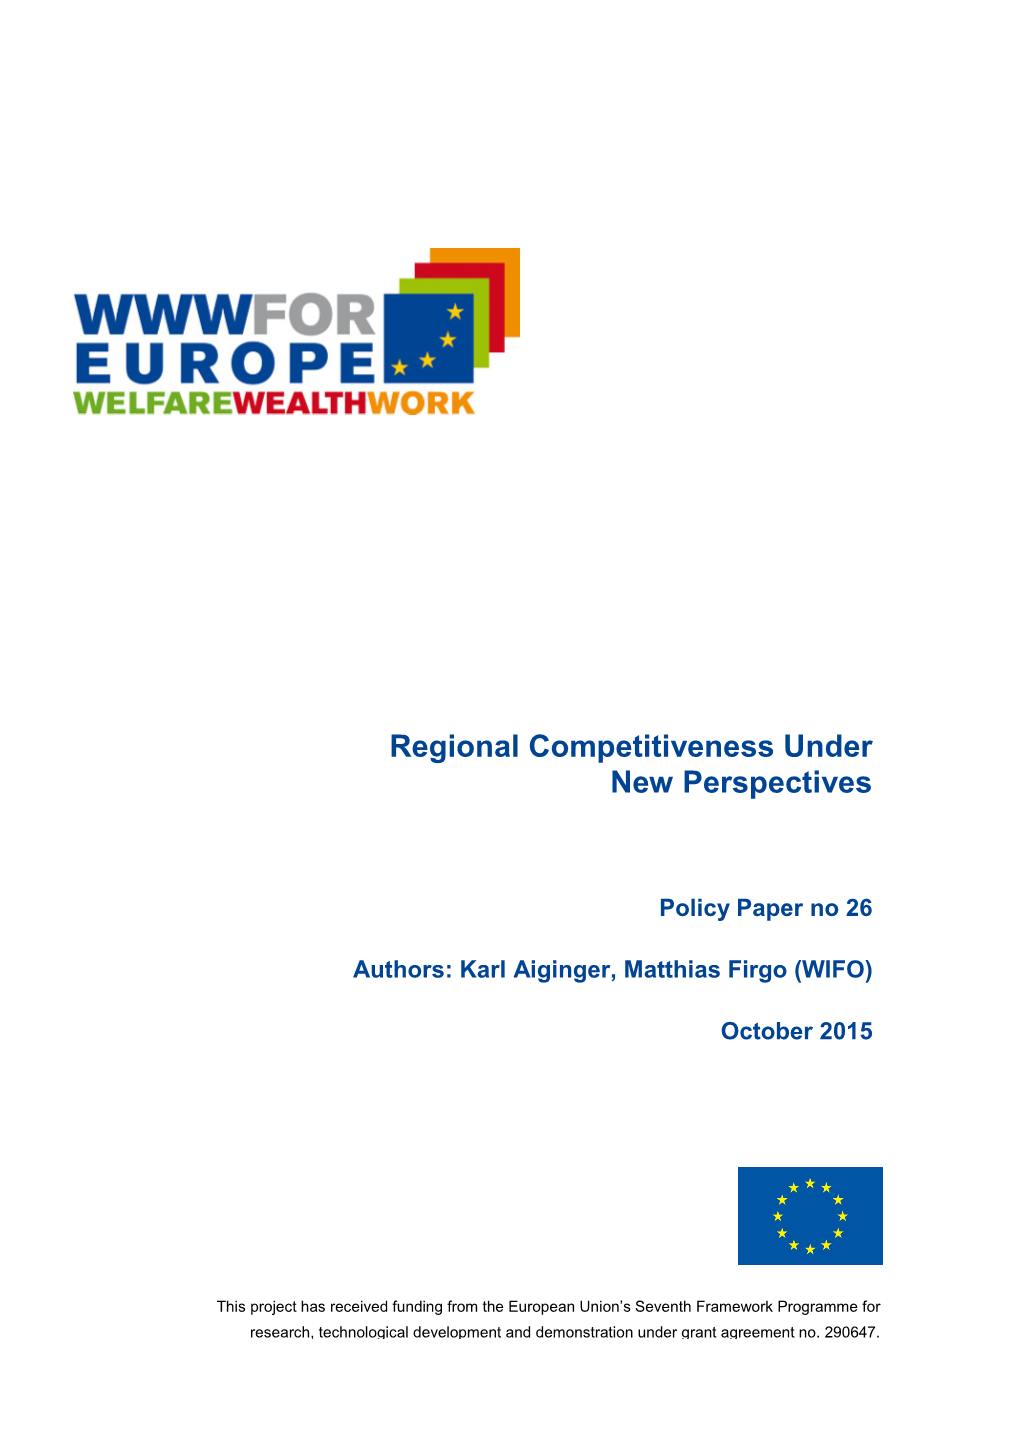 Regional Competitiveness Under New Perspectives